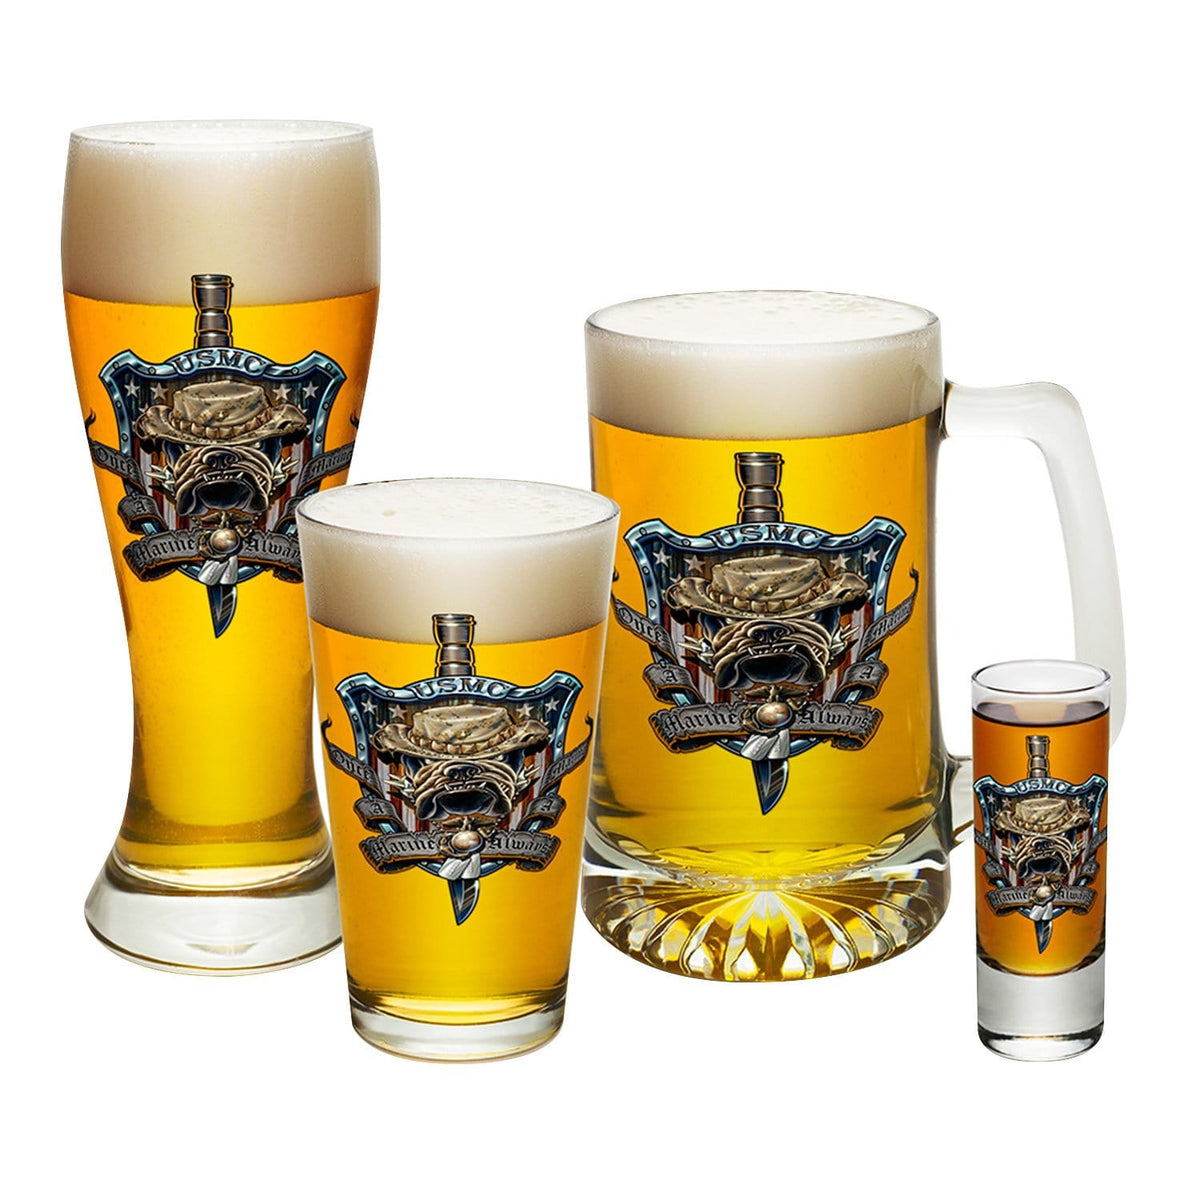 Once And Always A Marine 4 PC. Glass Set